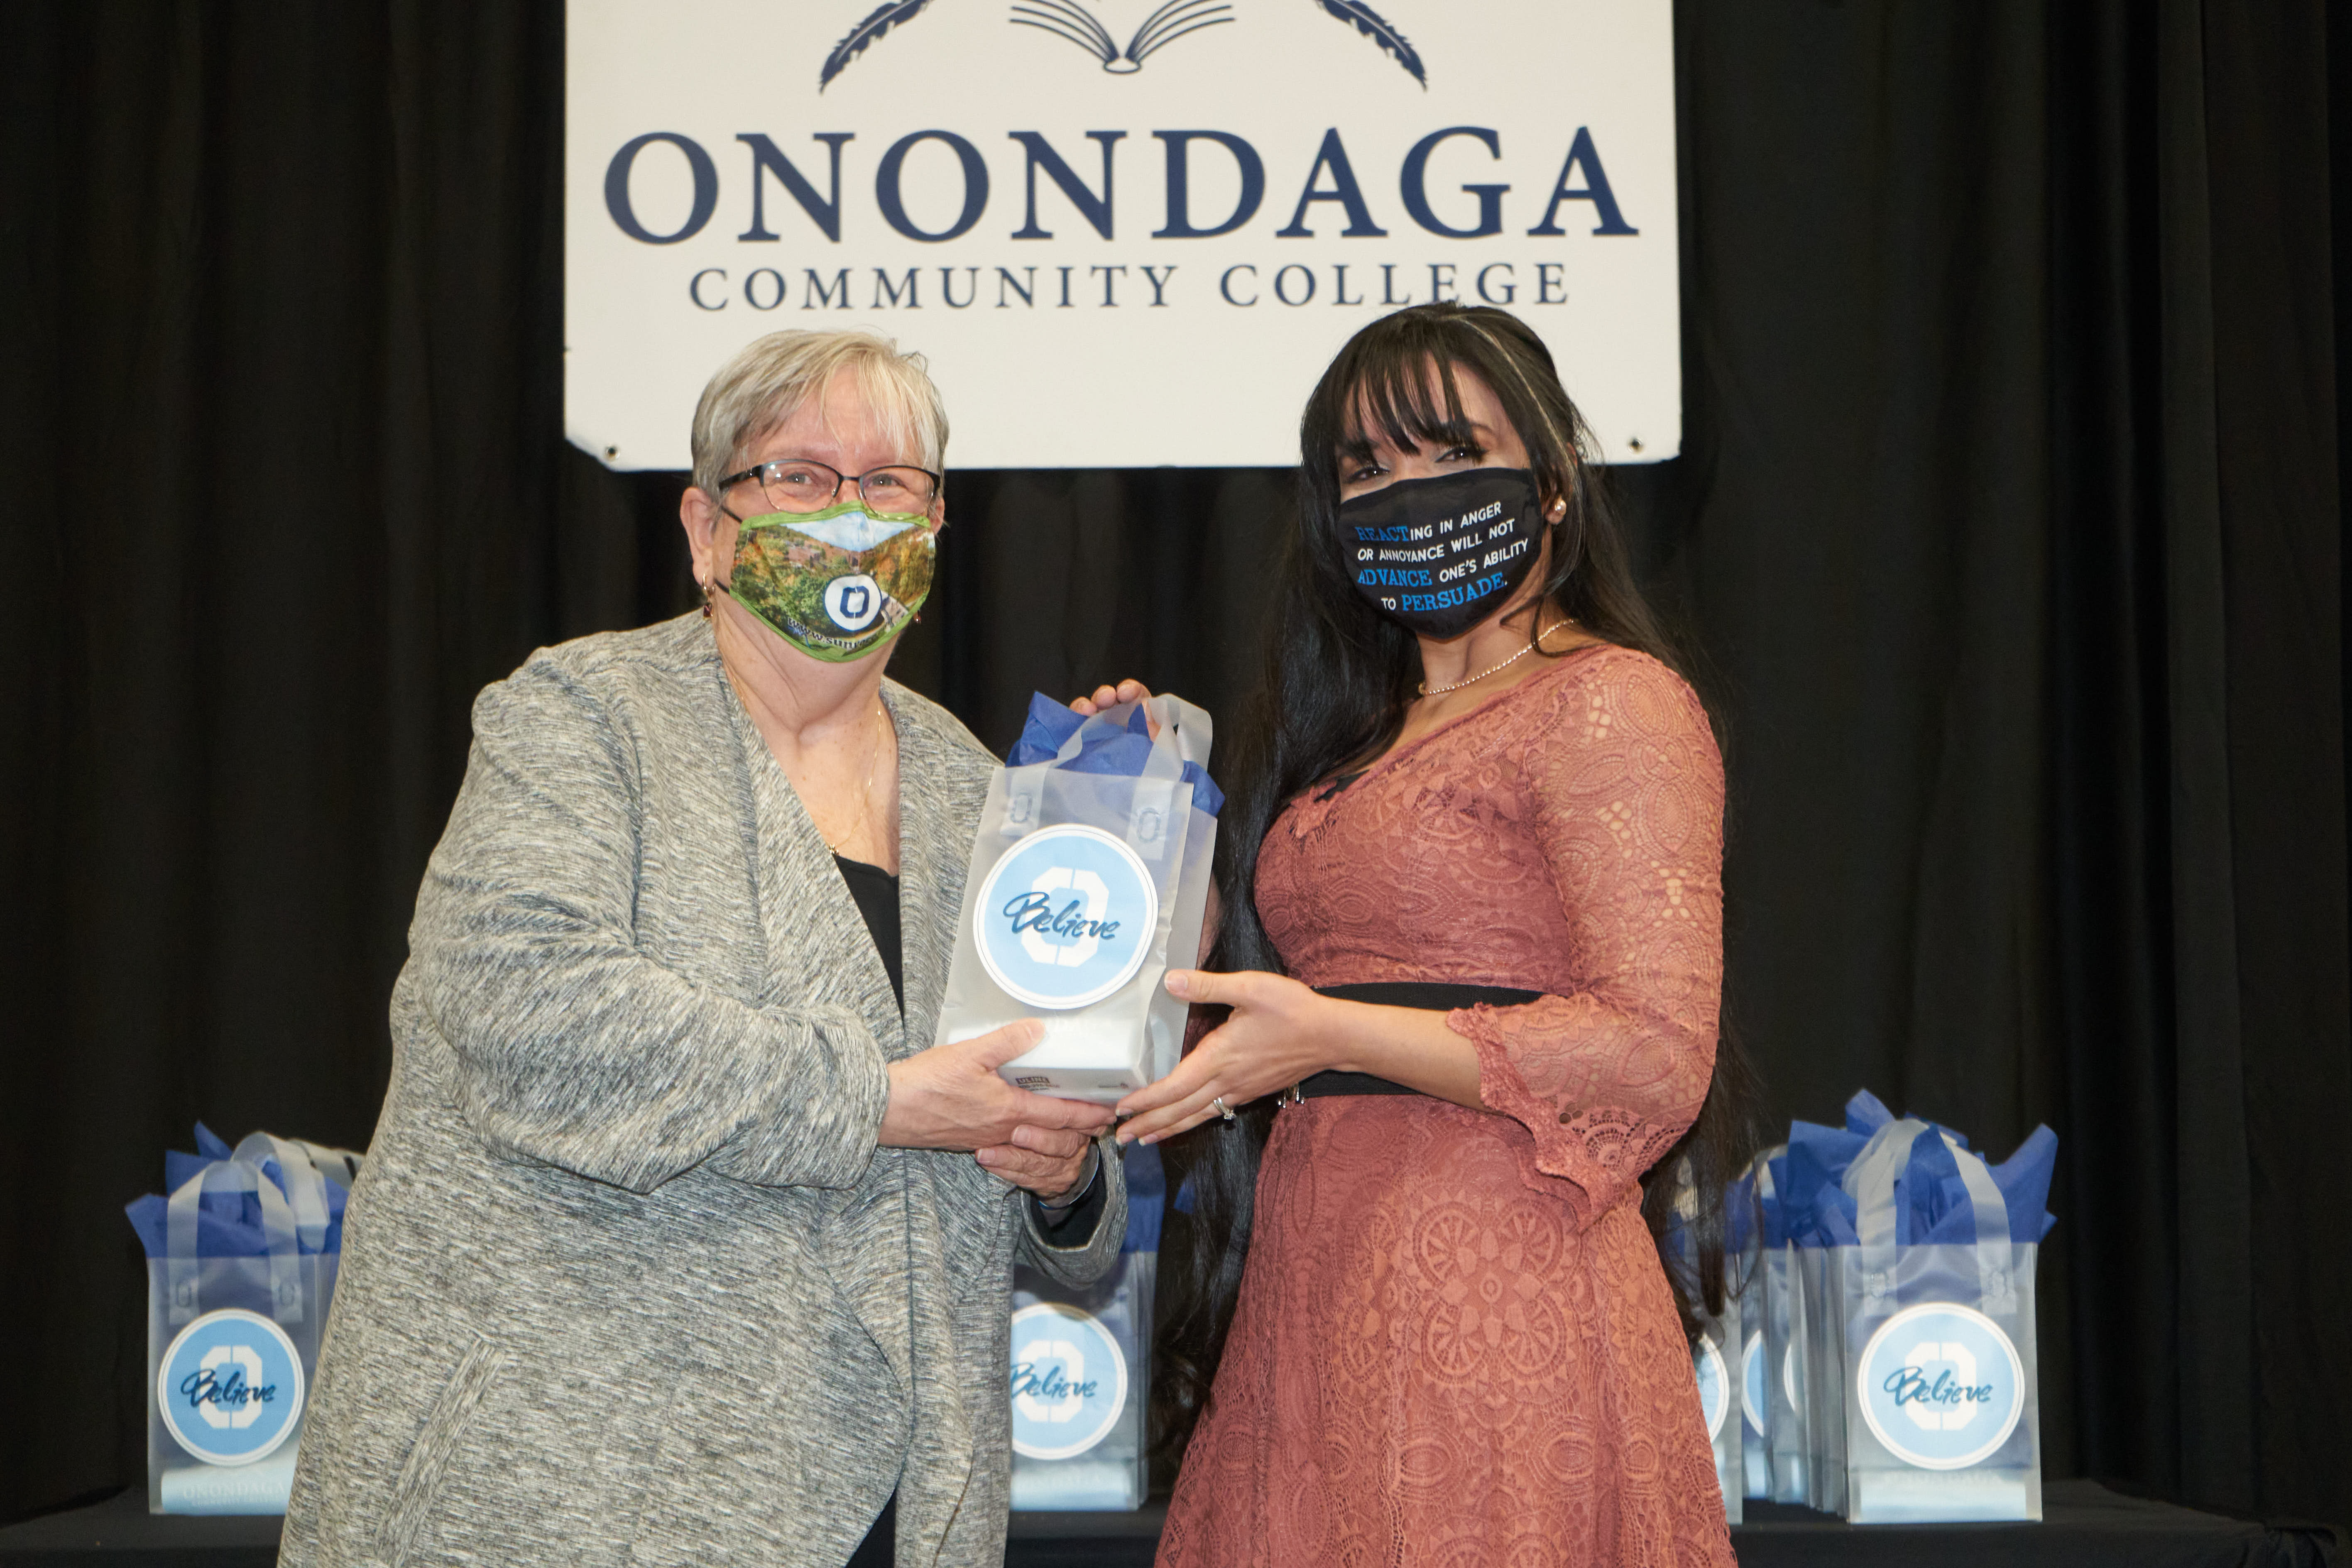 Nursing Curriculum Honoree Keila Arencibia-Cespedes (right) is pictured with OCC President Dr. Casey Crabill (right).